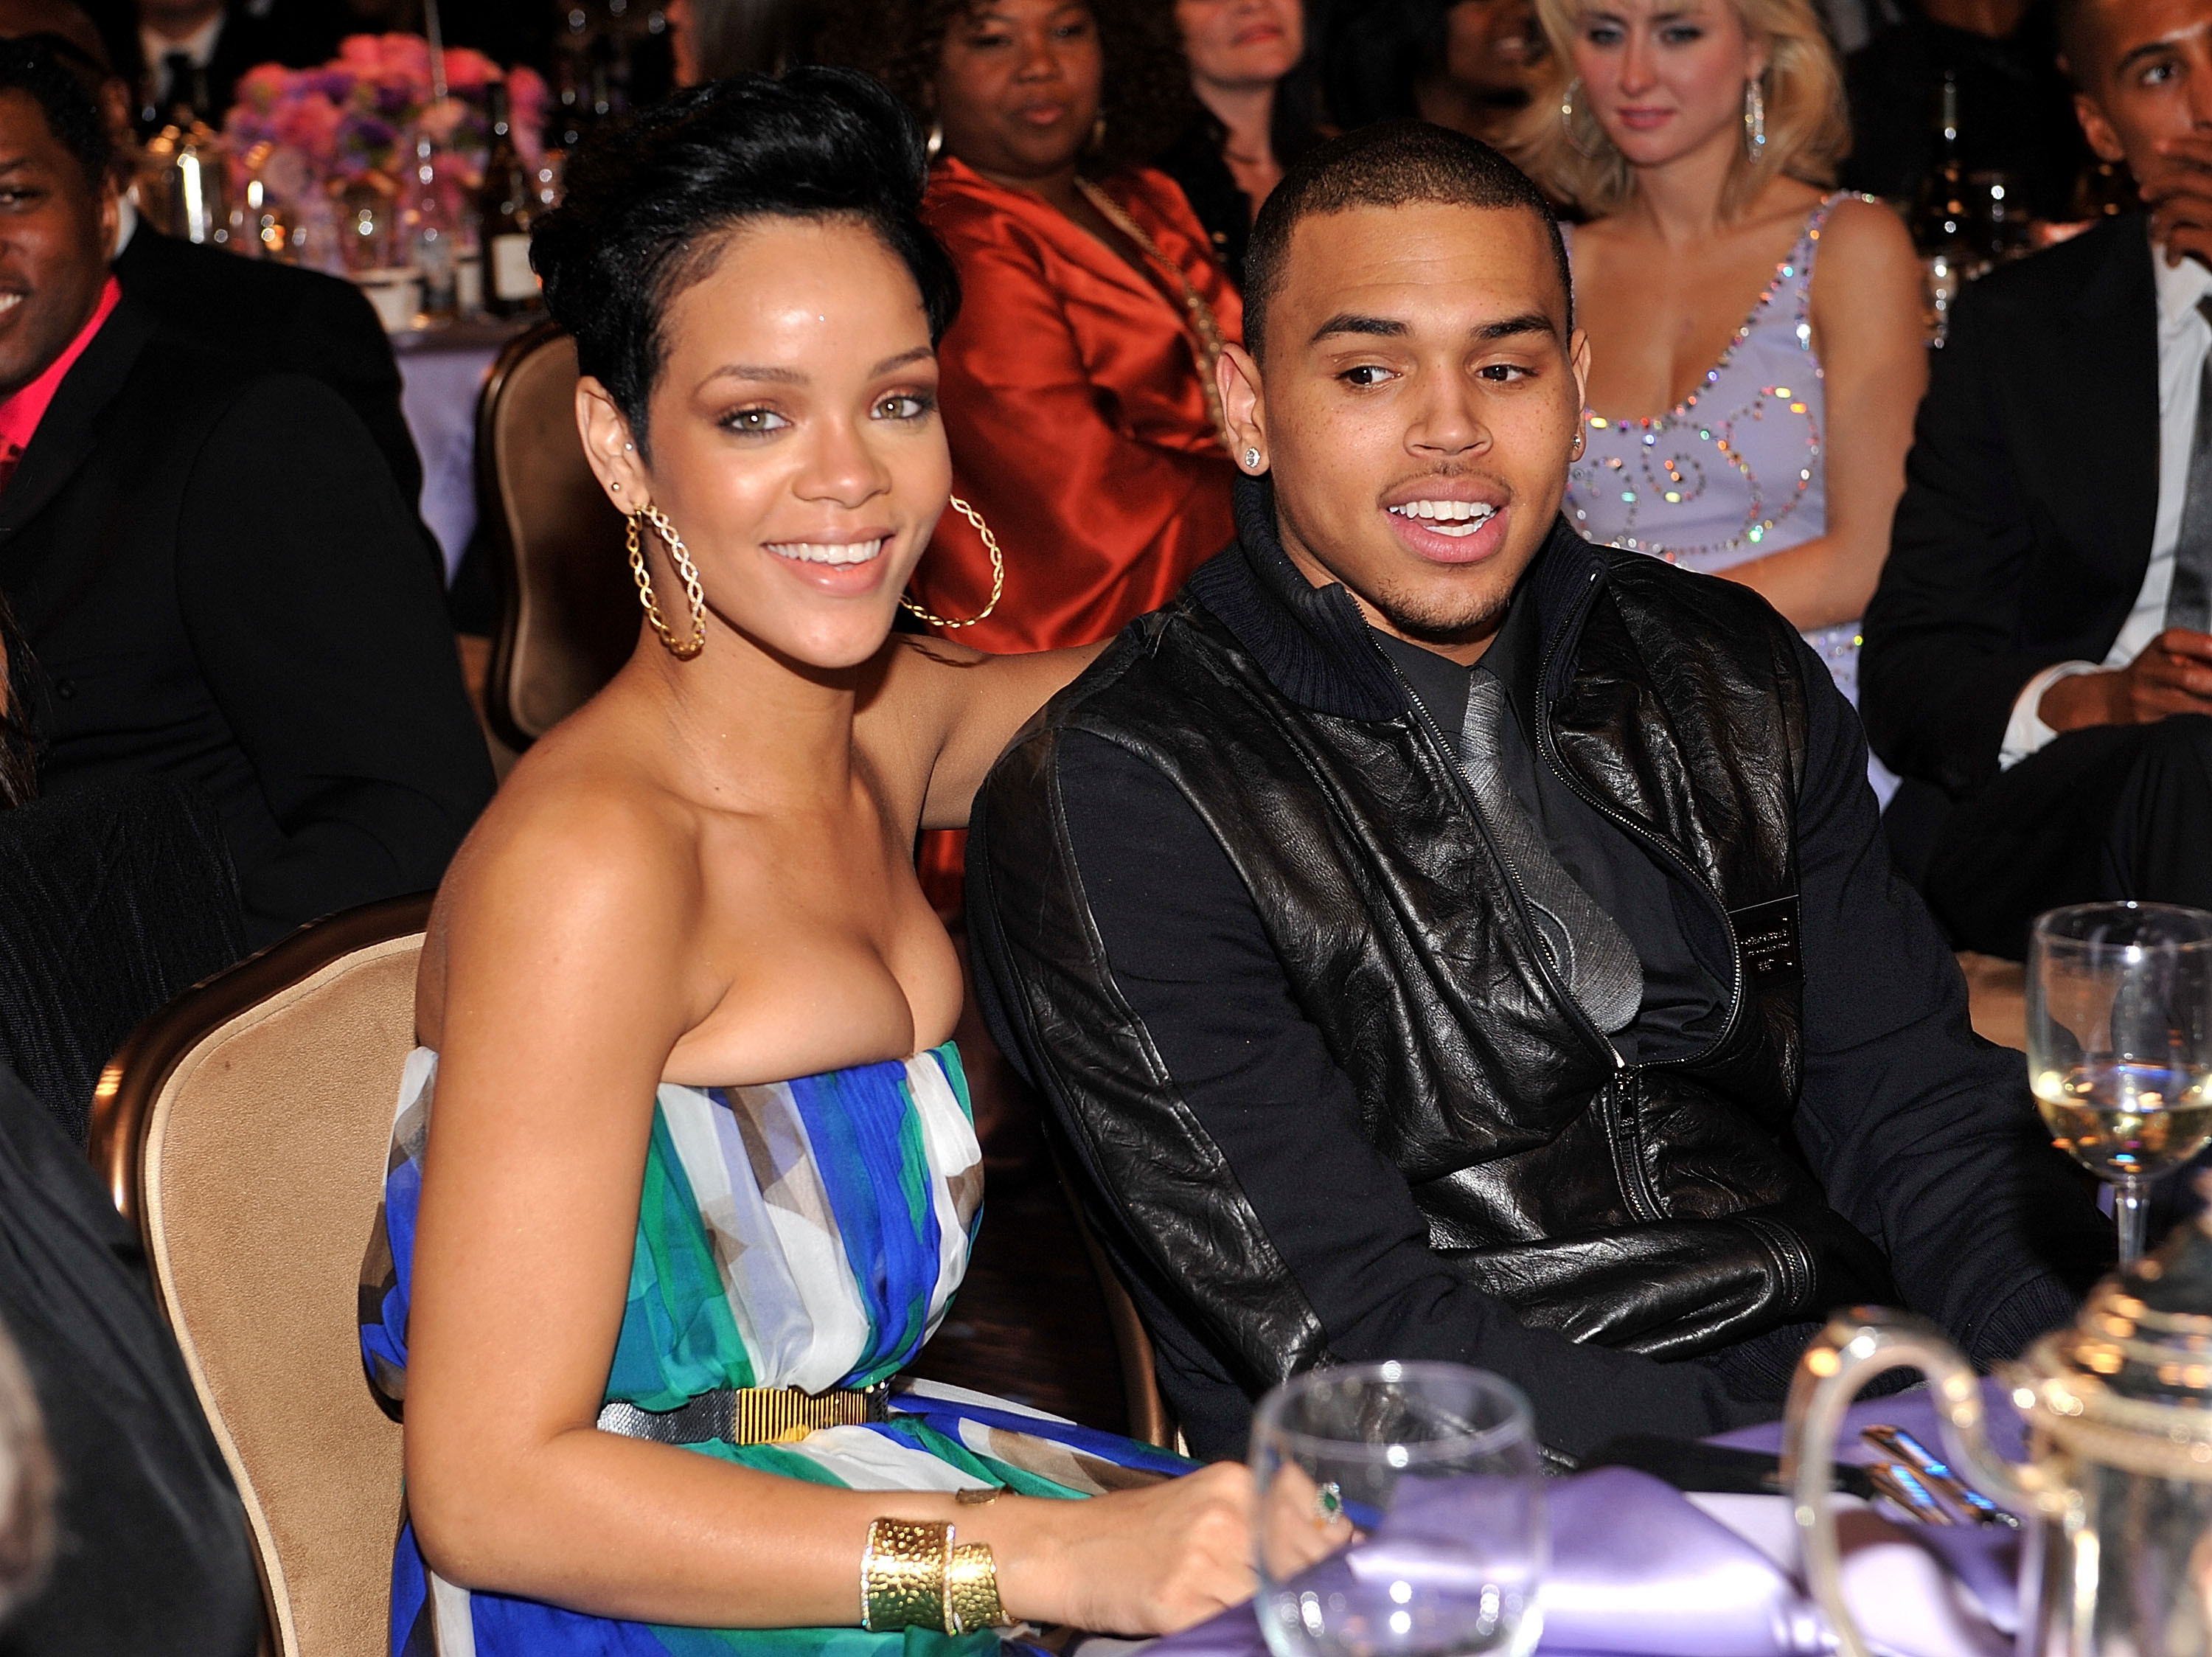 Why are Rihanna's comments about Chris Brown trending today?